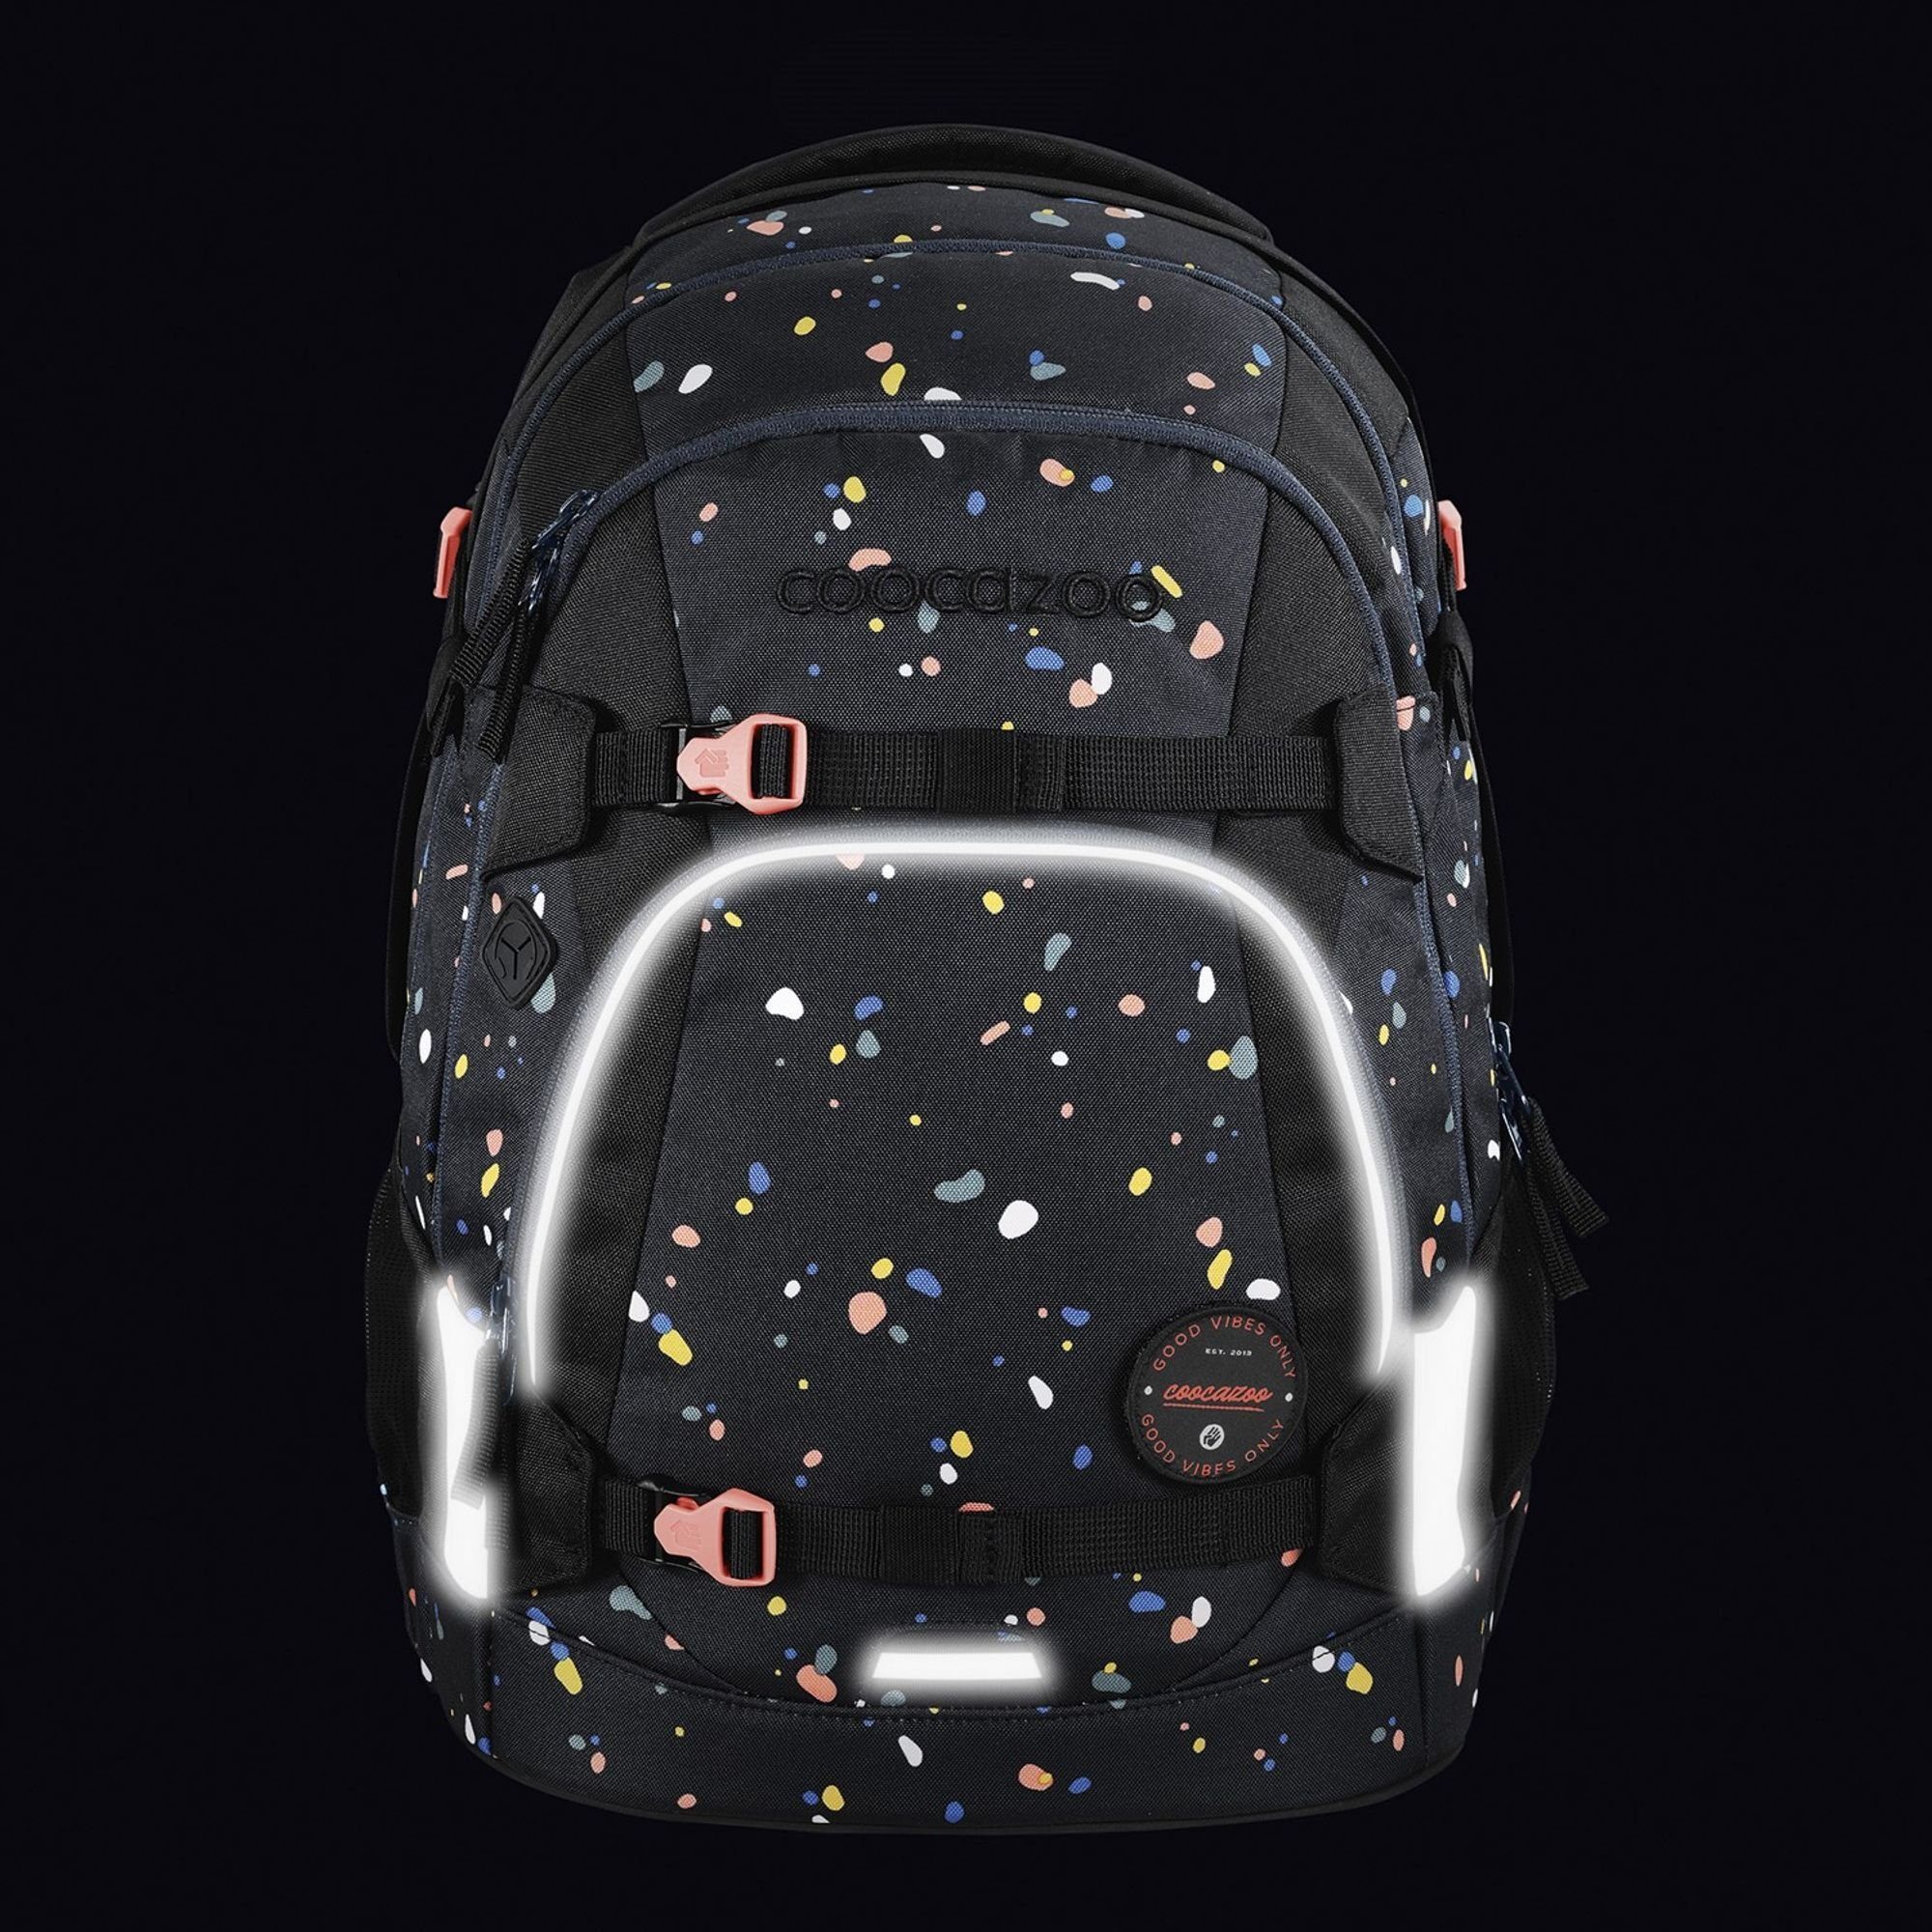 coocazoo Schulrucksack Mate, Polyester sprinkled candy